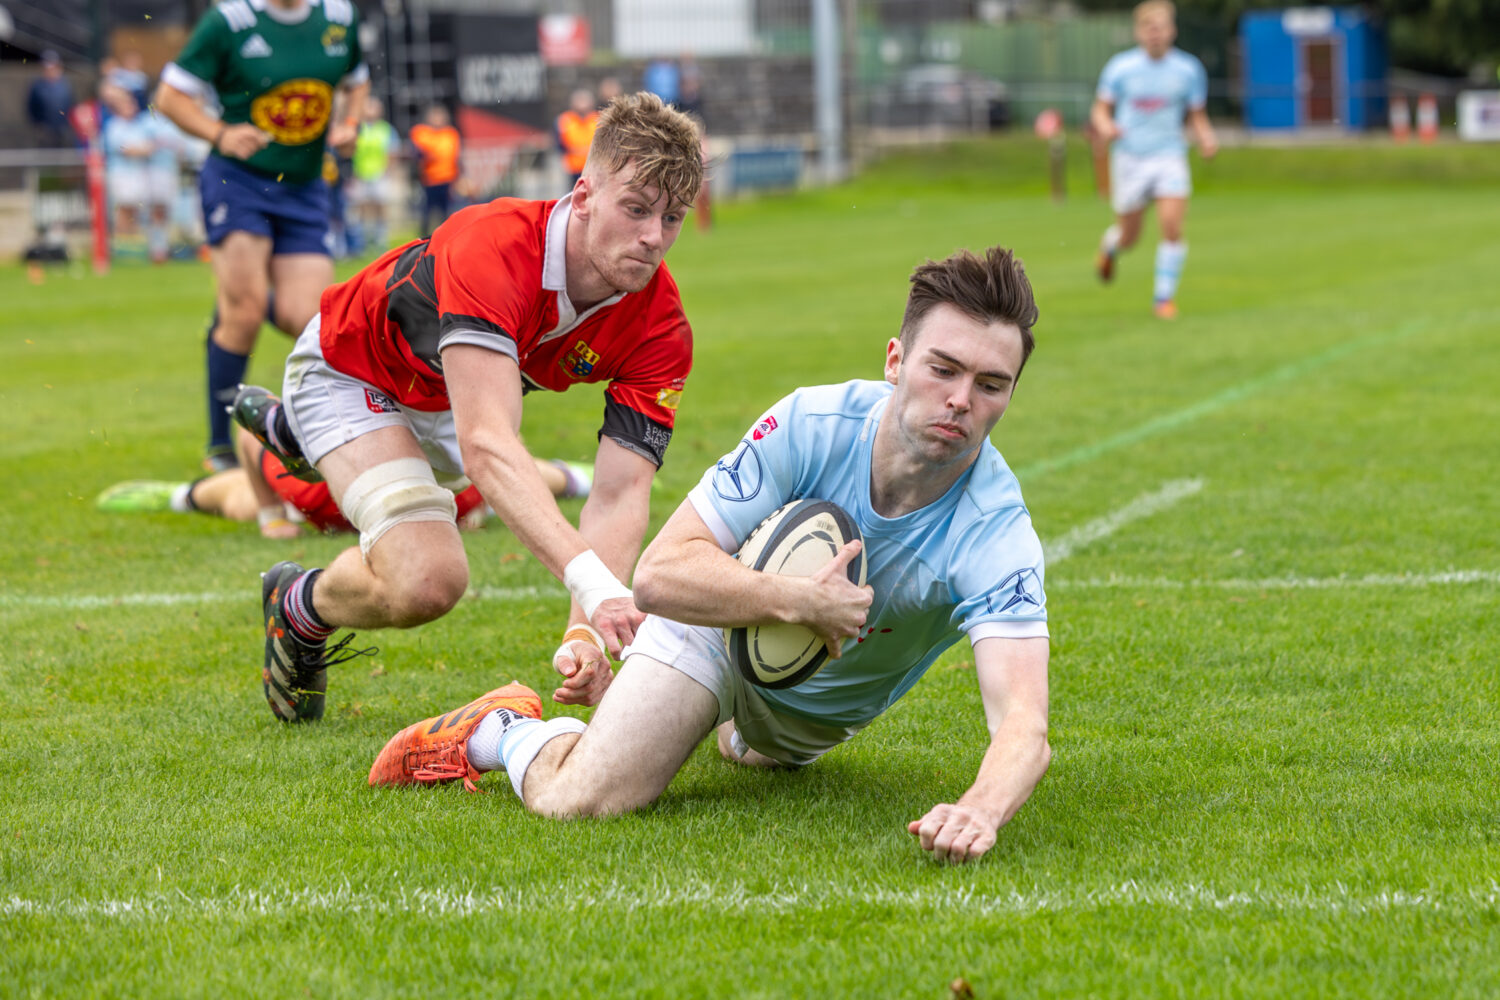 Colm Quilligan scoring a try against UCC RFC